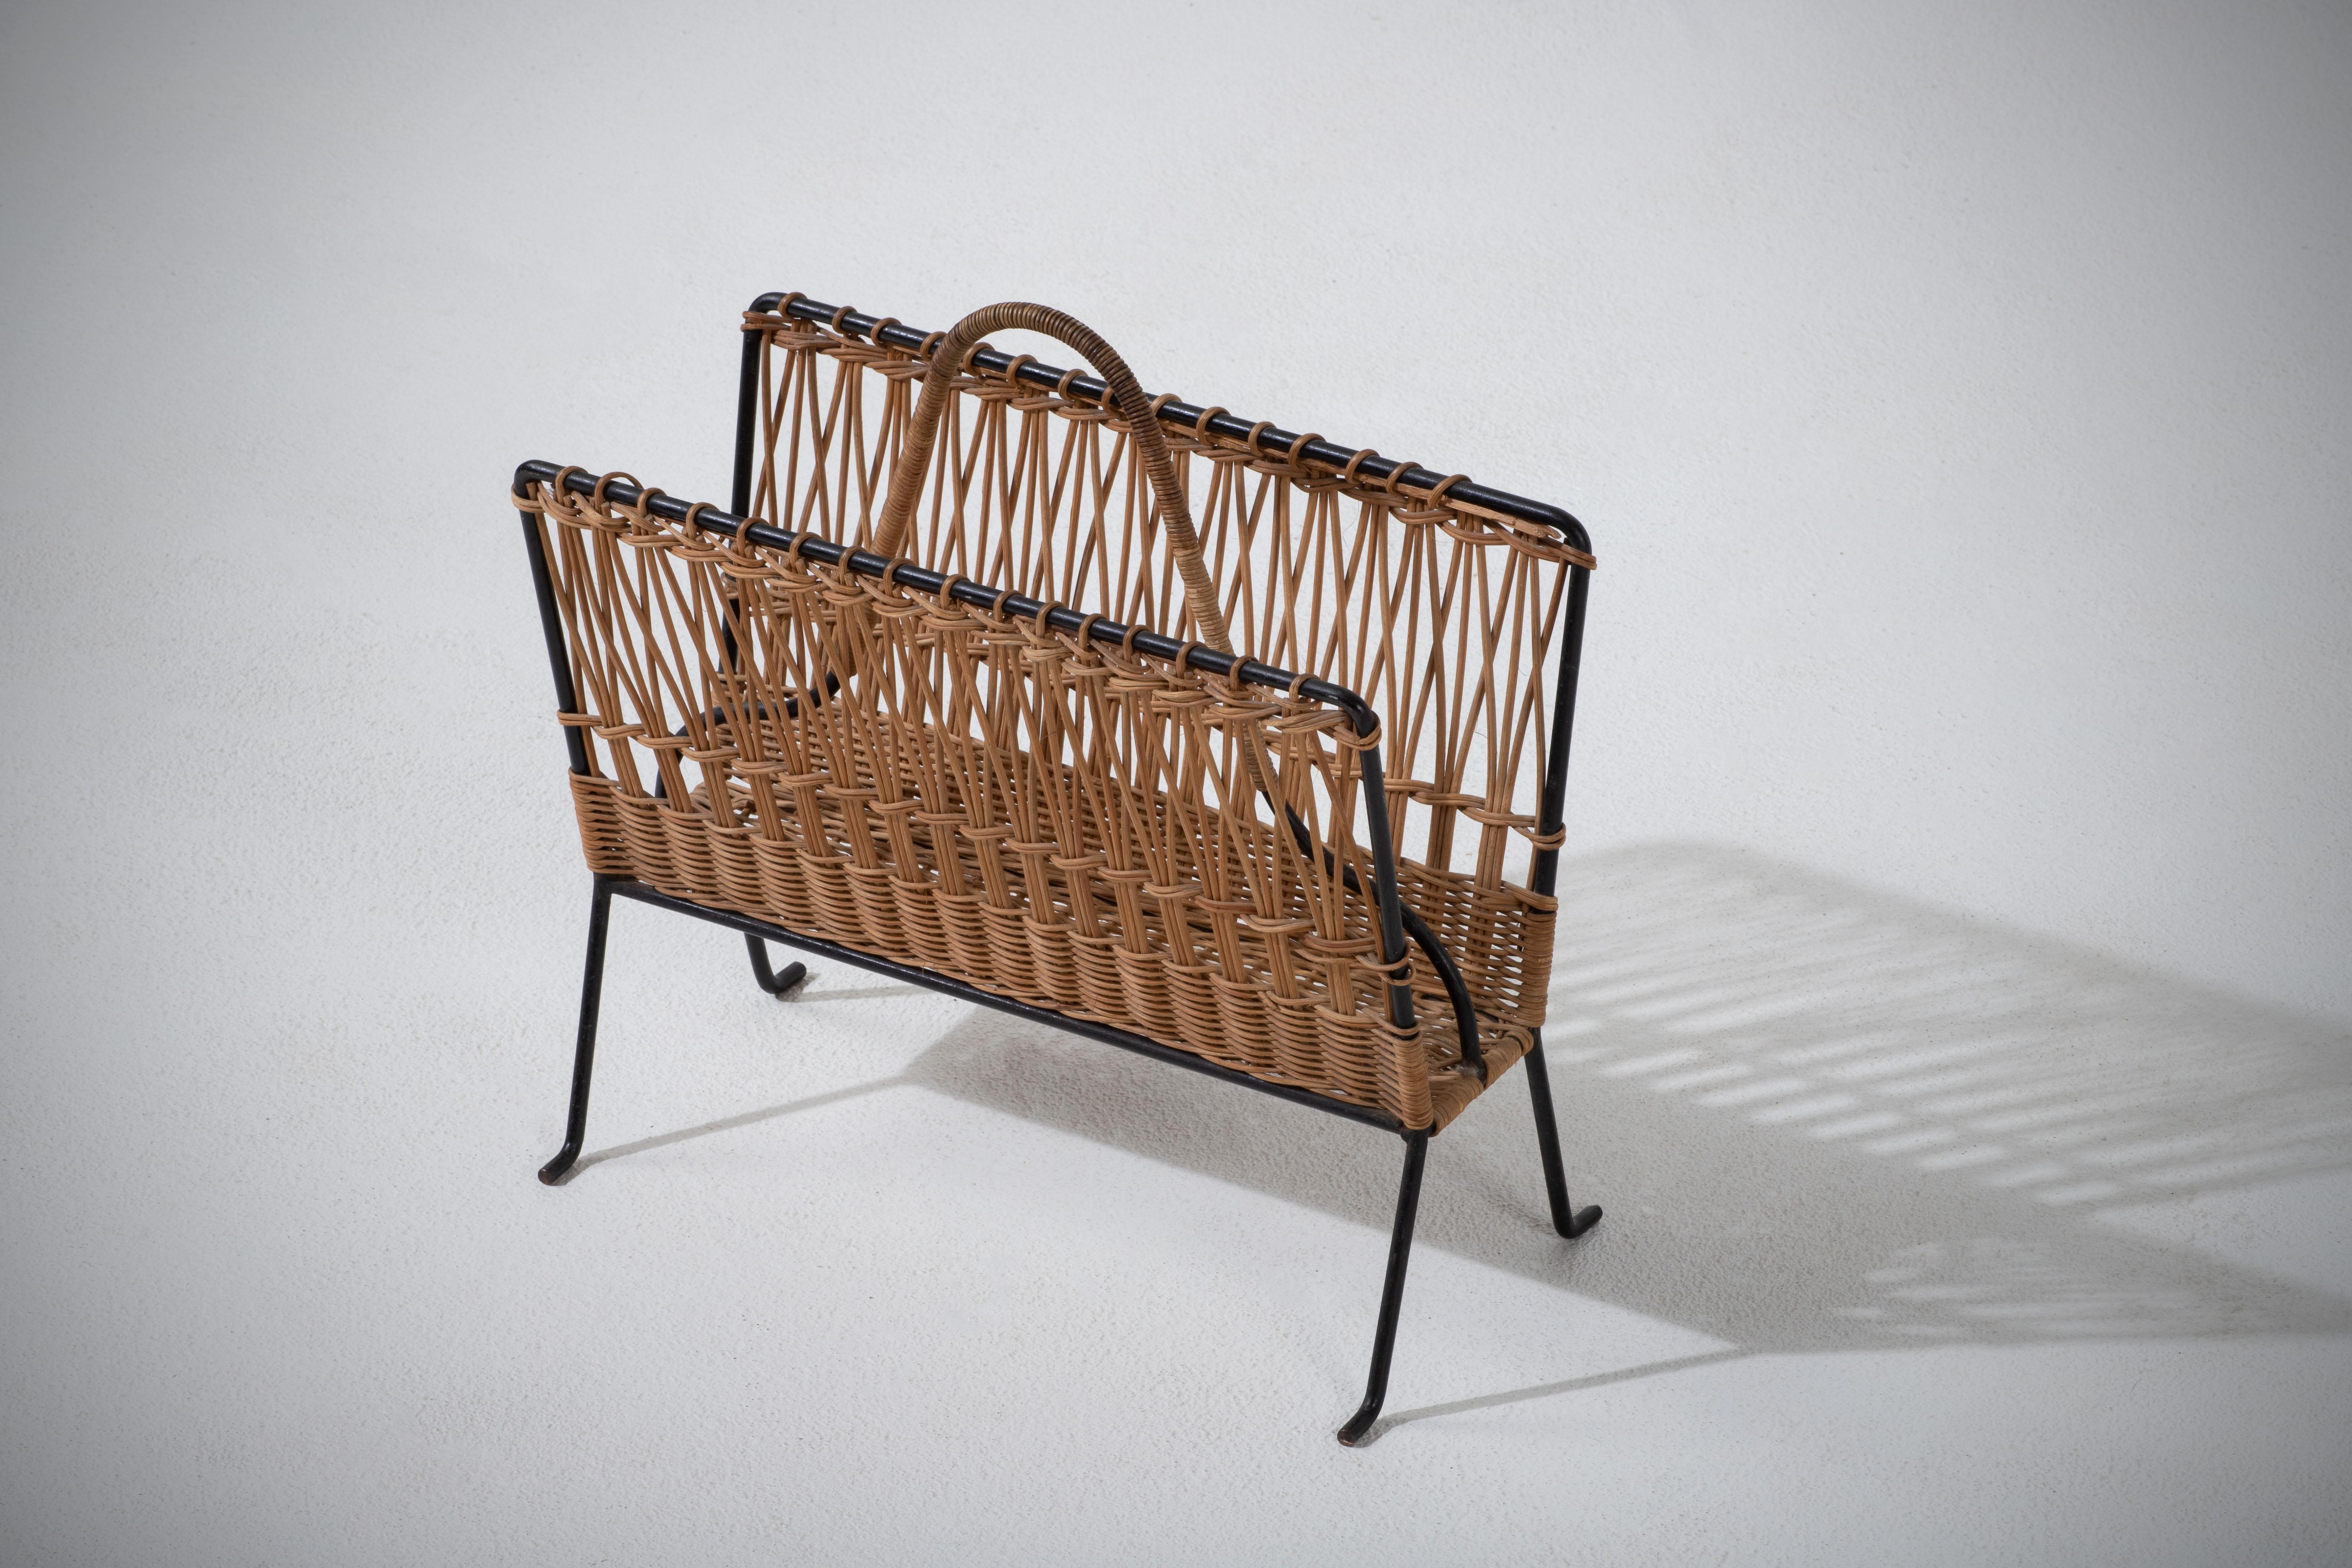 Jacques Adnet Wicker Magazine Rack with Black Iron Frame, Brass Ball Feet, 1950s For Sale 2